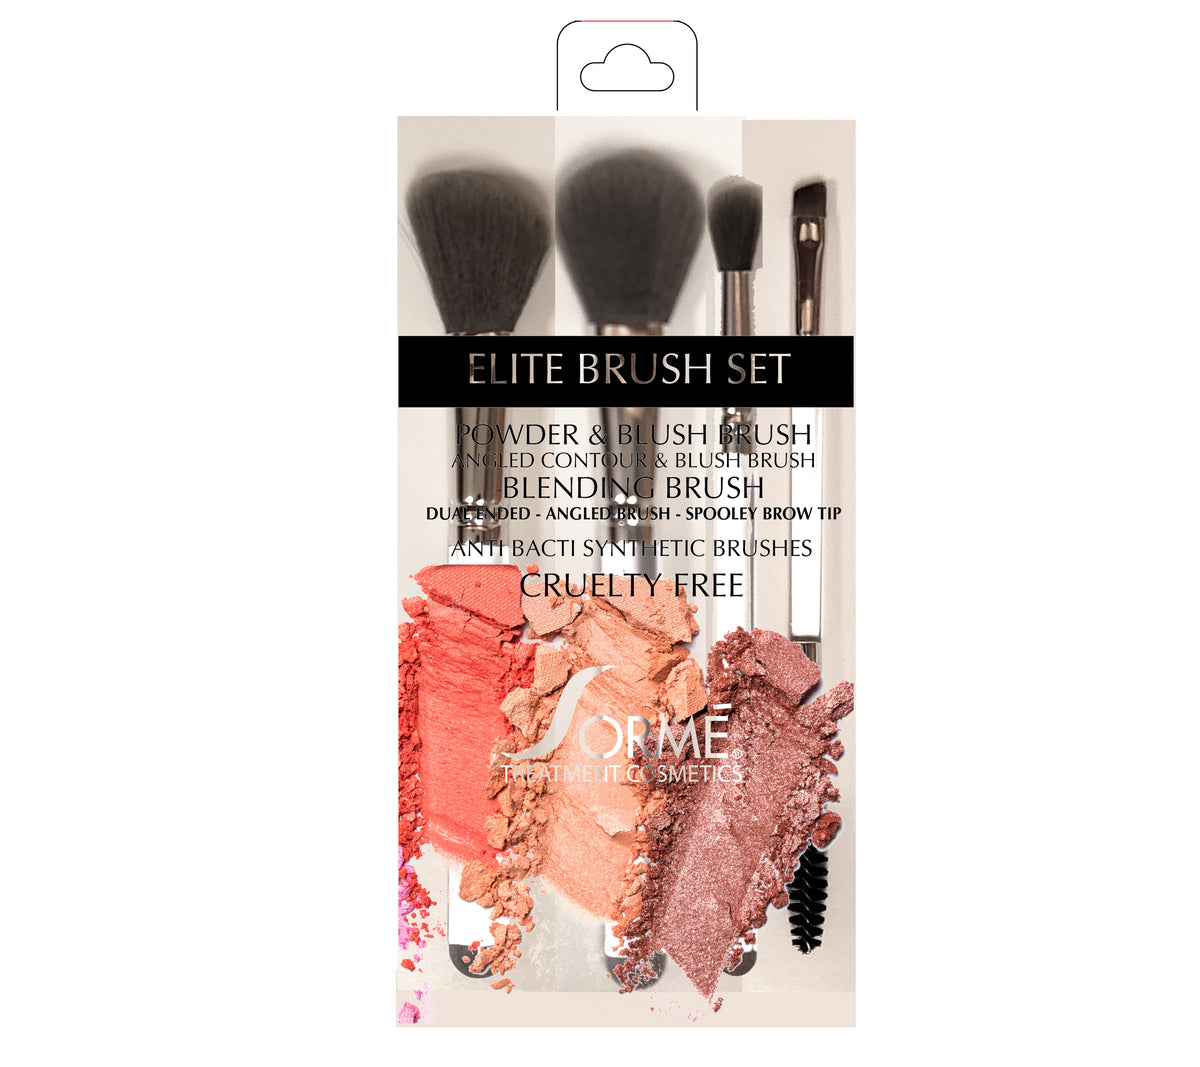 Sorme new brushes and brush sets (natural and synthetic brushes)